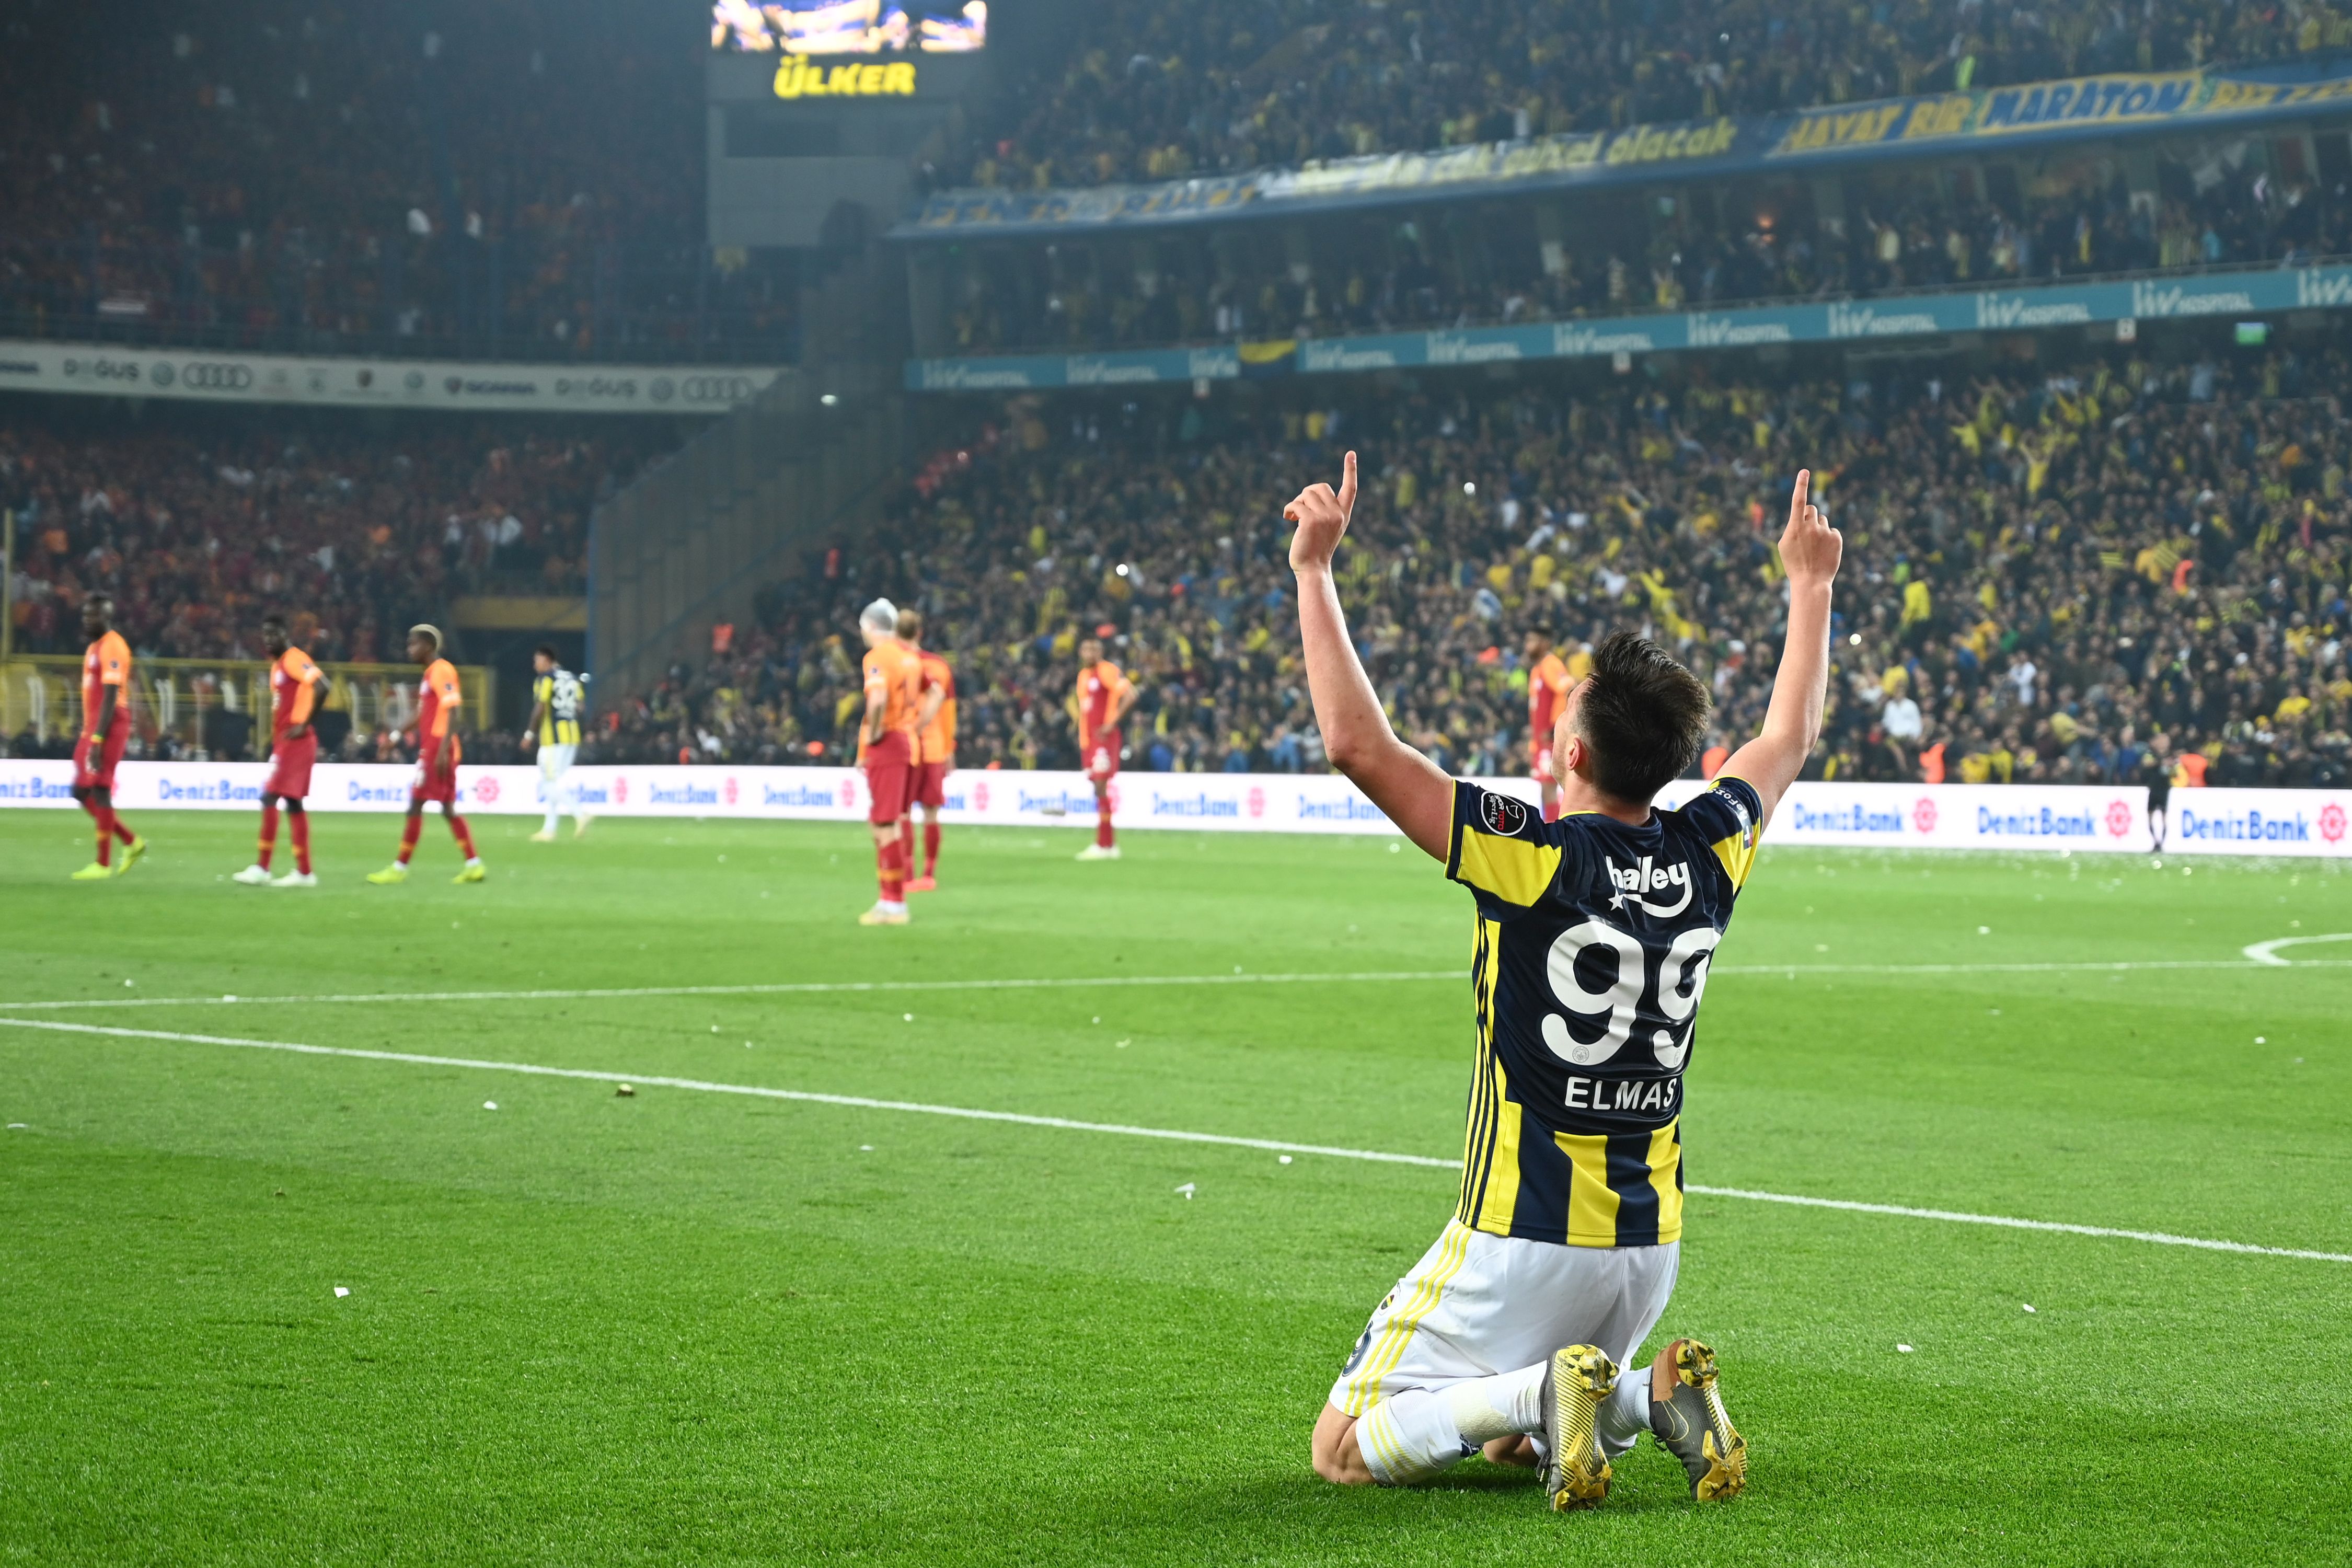 Fenerbahce's Macedonian midfielder Eljif Elmas celebrates after scoring a goal during the Turkish Super league football match between Fenerbahce and Galatasaray on April 14, 2019 at the Fenerbahce stadium in Istanbul. (Photo by OZAN KOSE / AFP)        (Photo credit should read OZAN KOSE/AFP/Getty Images)